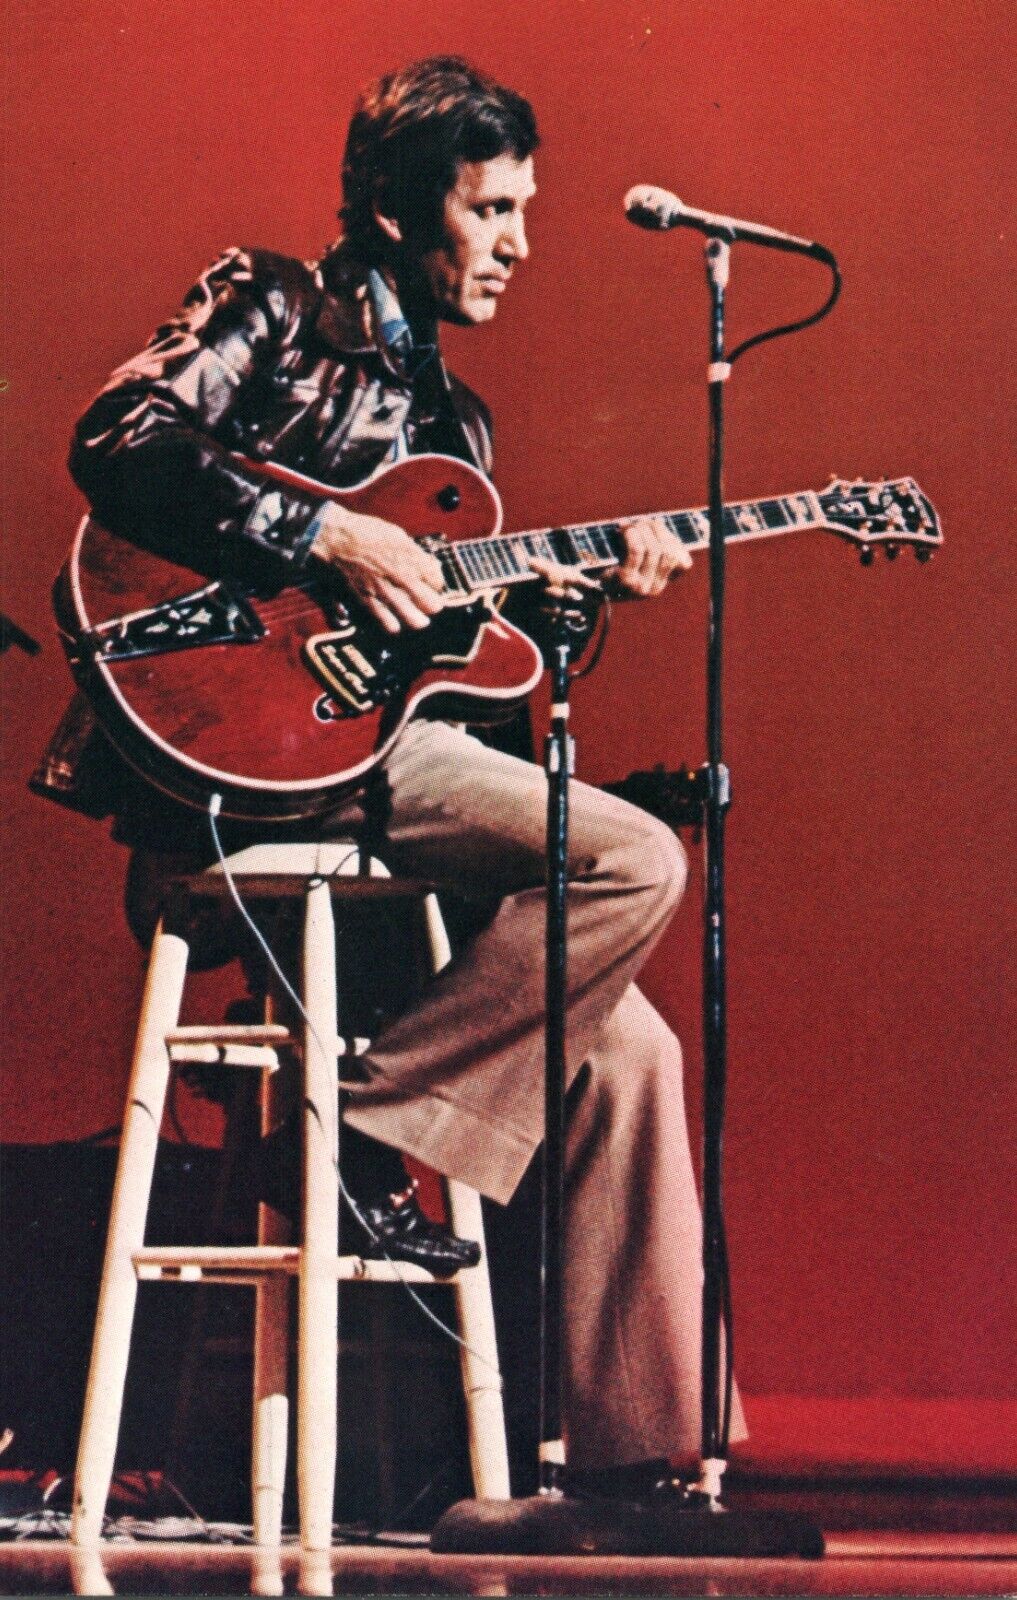 Chet Atkins on Stool Playing Red Gretsch Guitar Vintage Postcard